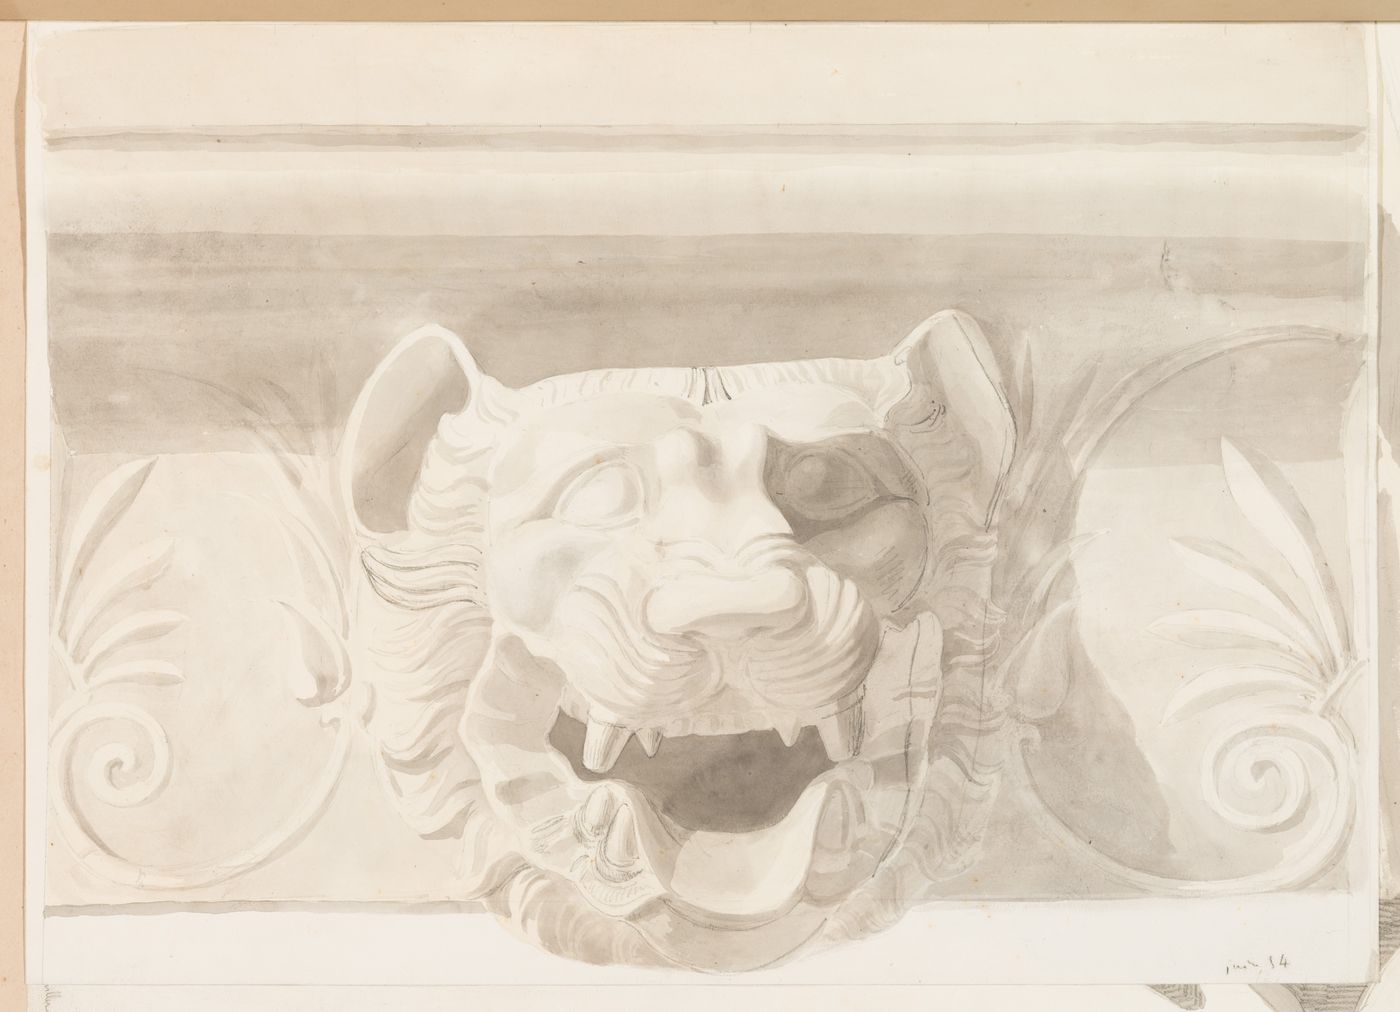 Detail of a frieze with a lion's head and anthemion ornament